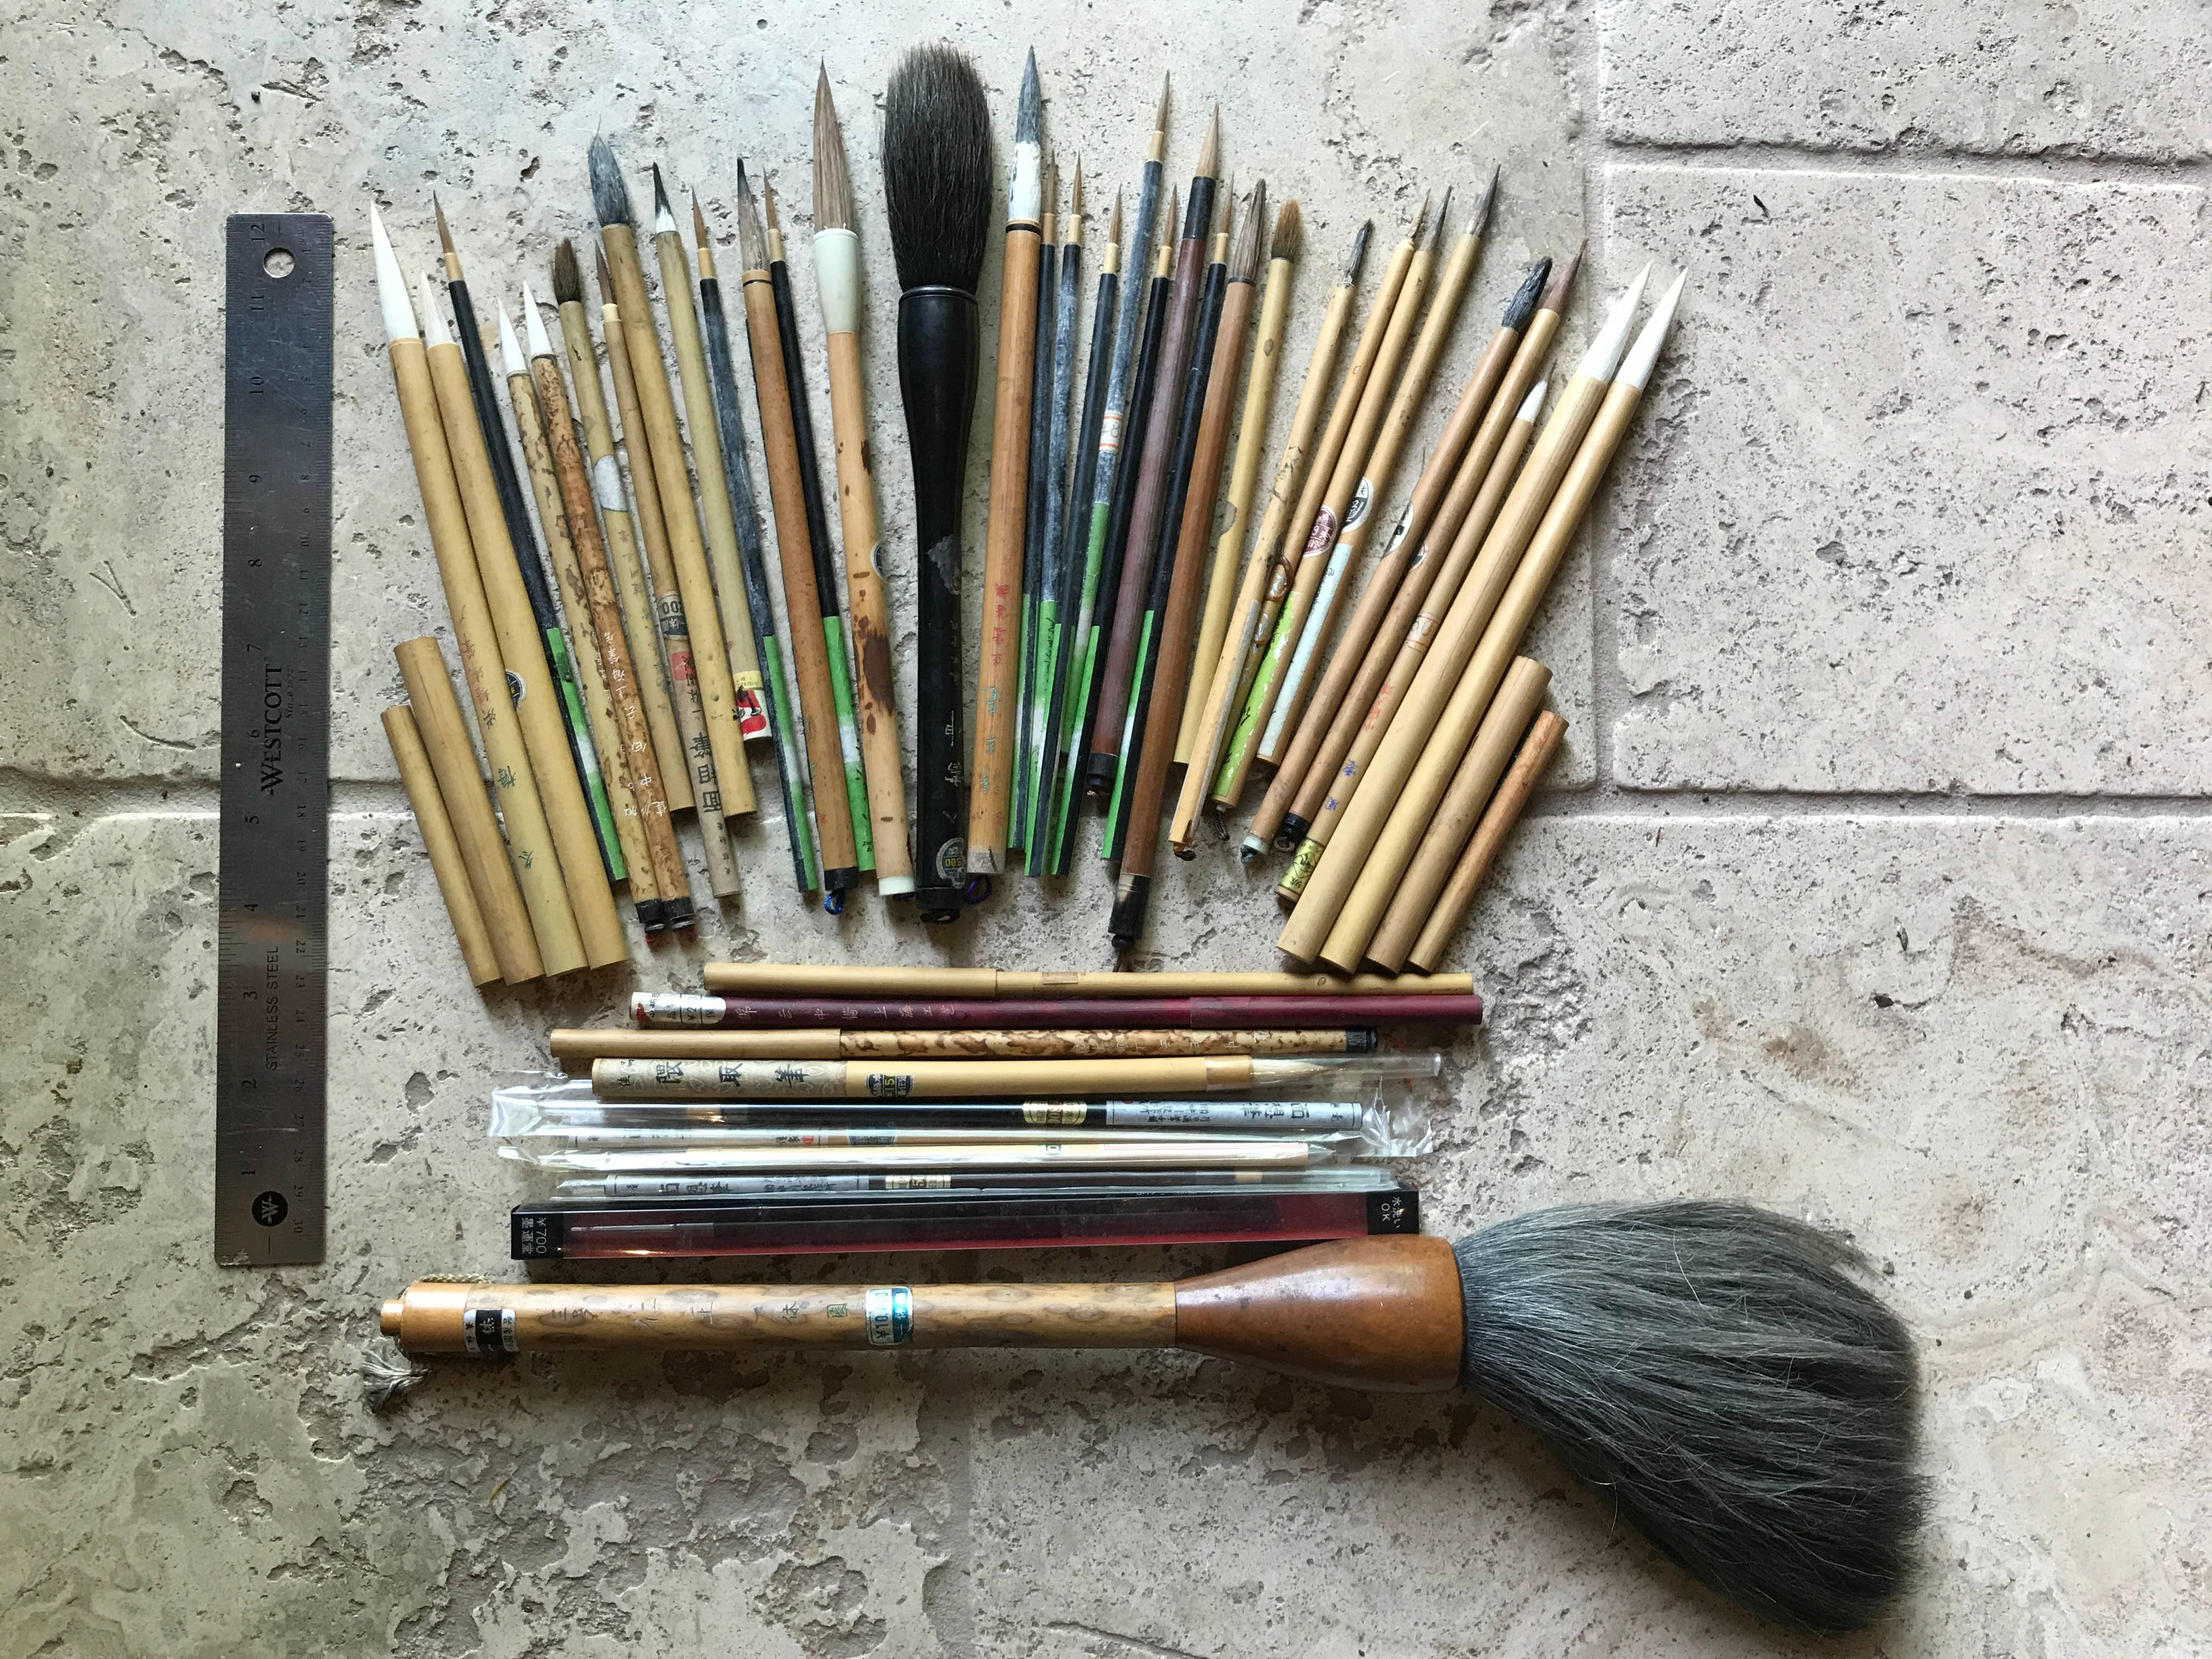 Mid-Century Modern Found! Antique Artisan's Cache of 43 Old Paint and Calligraphy Bamboo Brushes